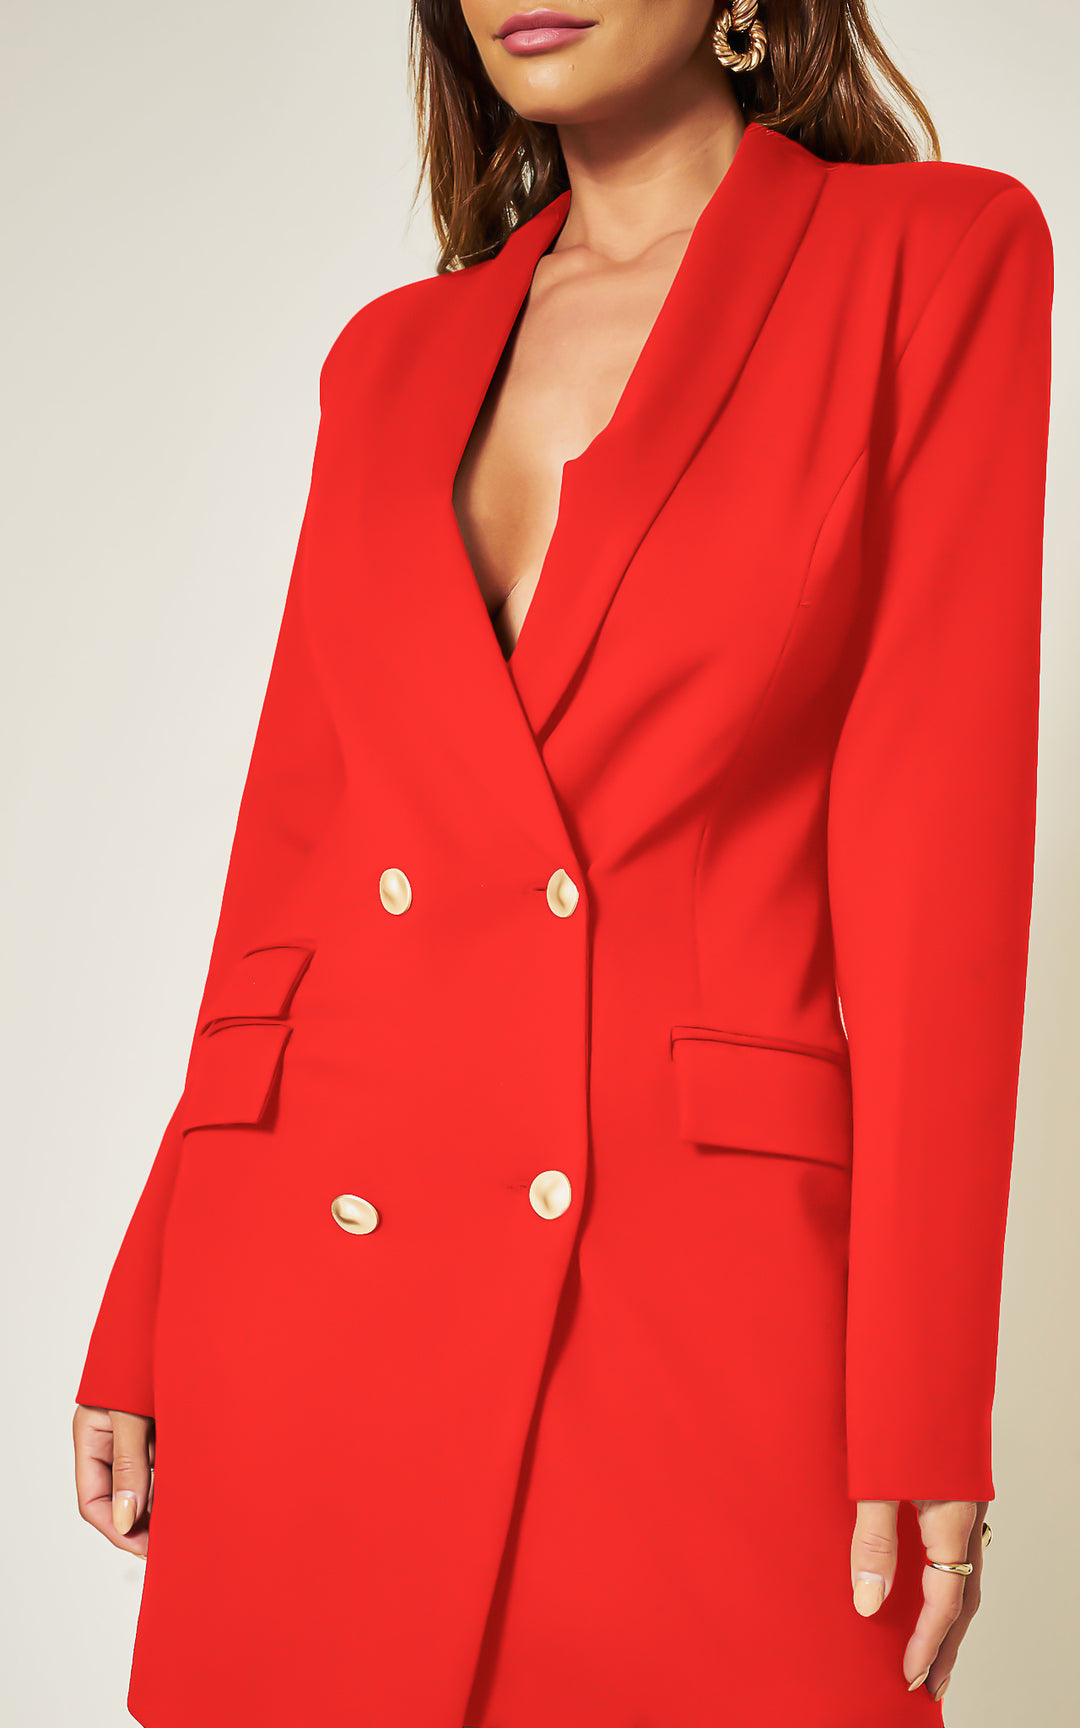 Luxe Stain Double Breasted Asymmetric Blazer Dress with Gold Buttons